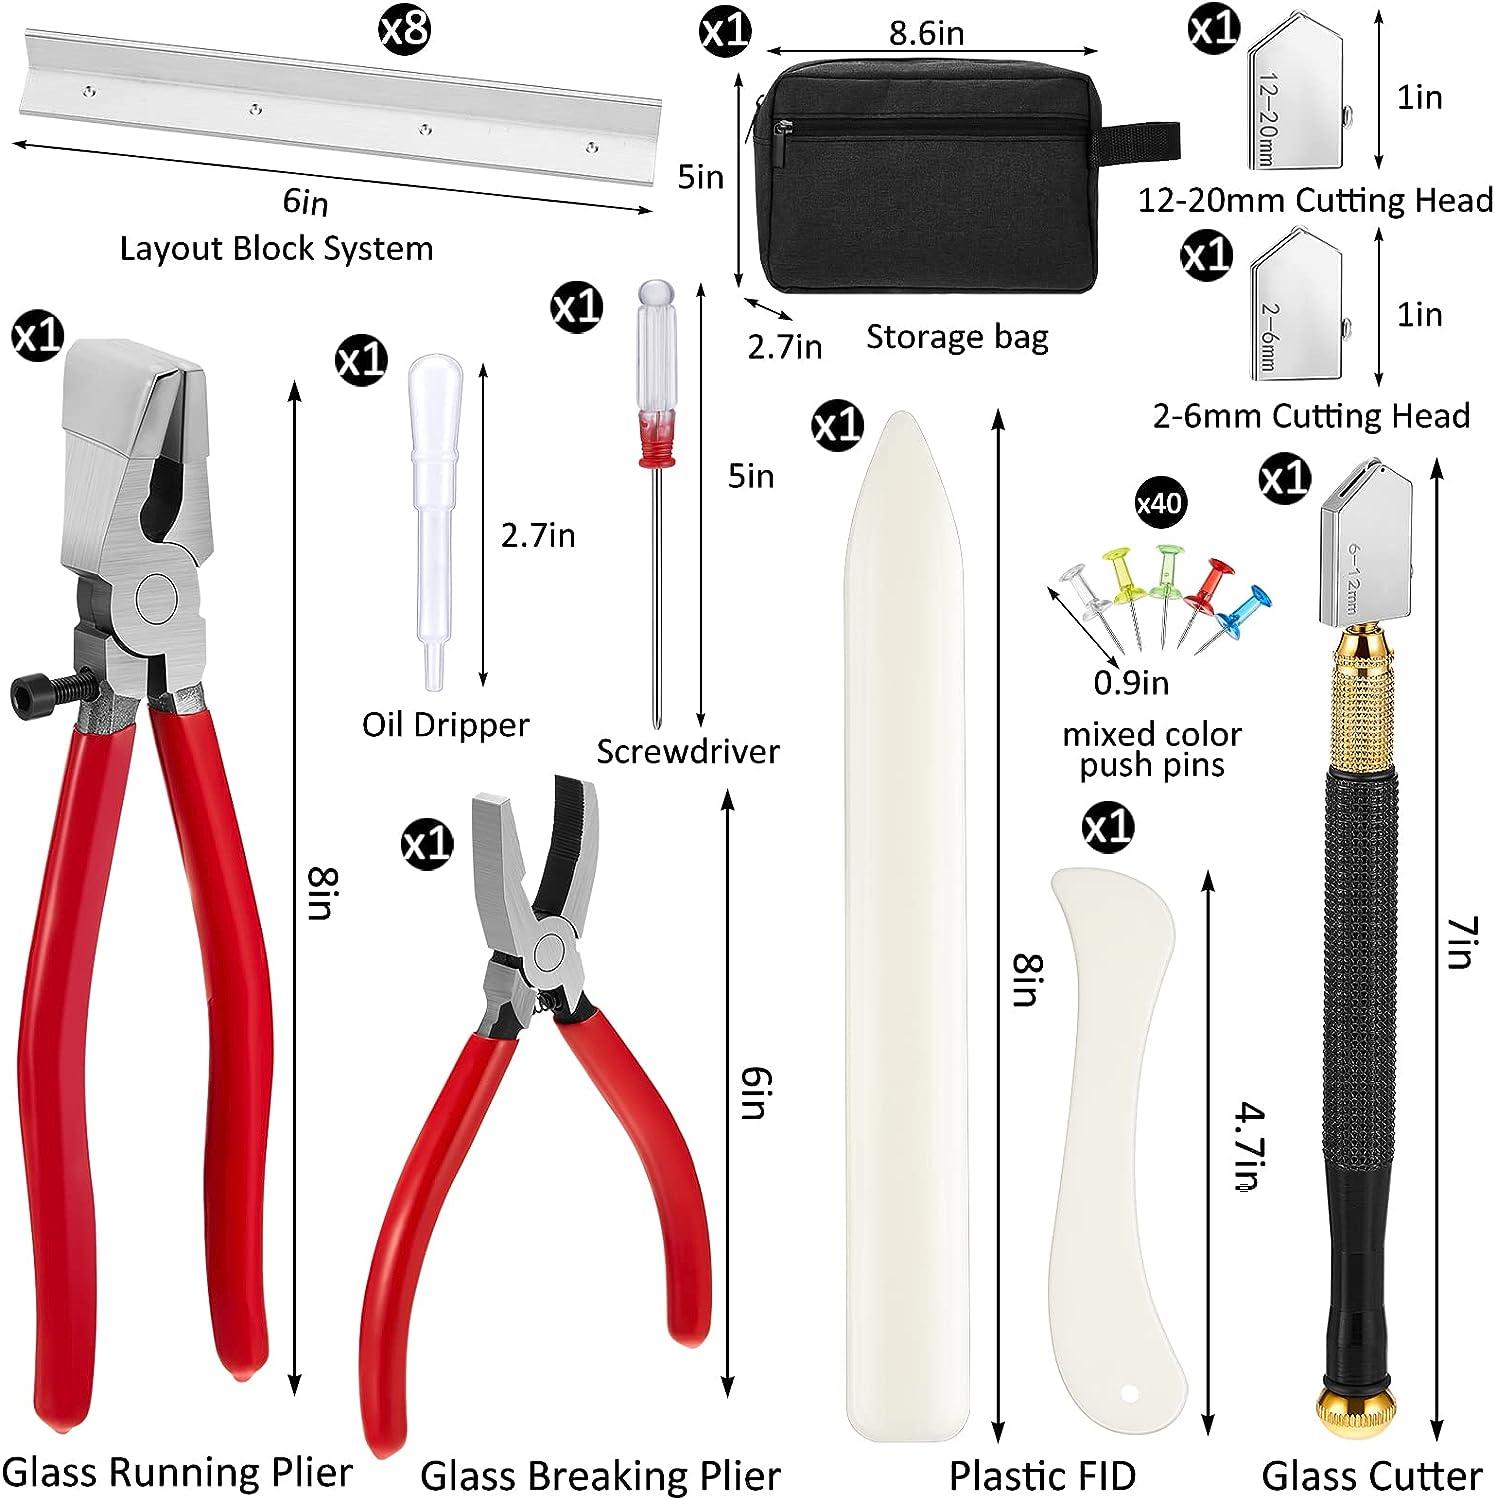 GLS-270, Stained Glass Starter Kit 7 Pcs Set Includes 4 Pliers and 3 Cutters  